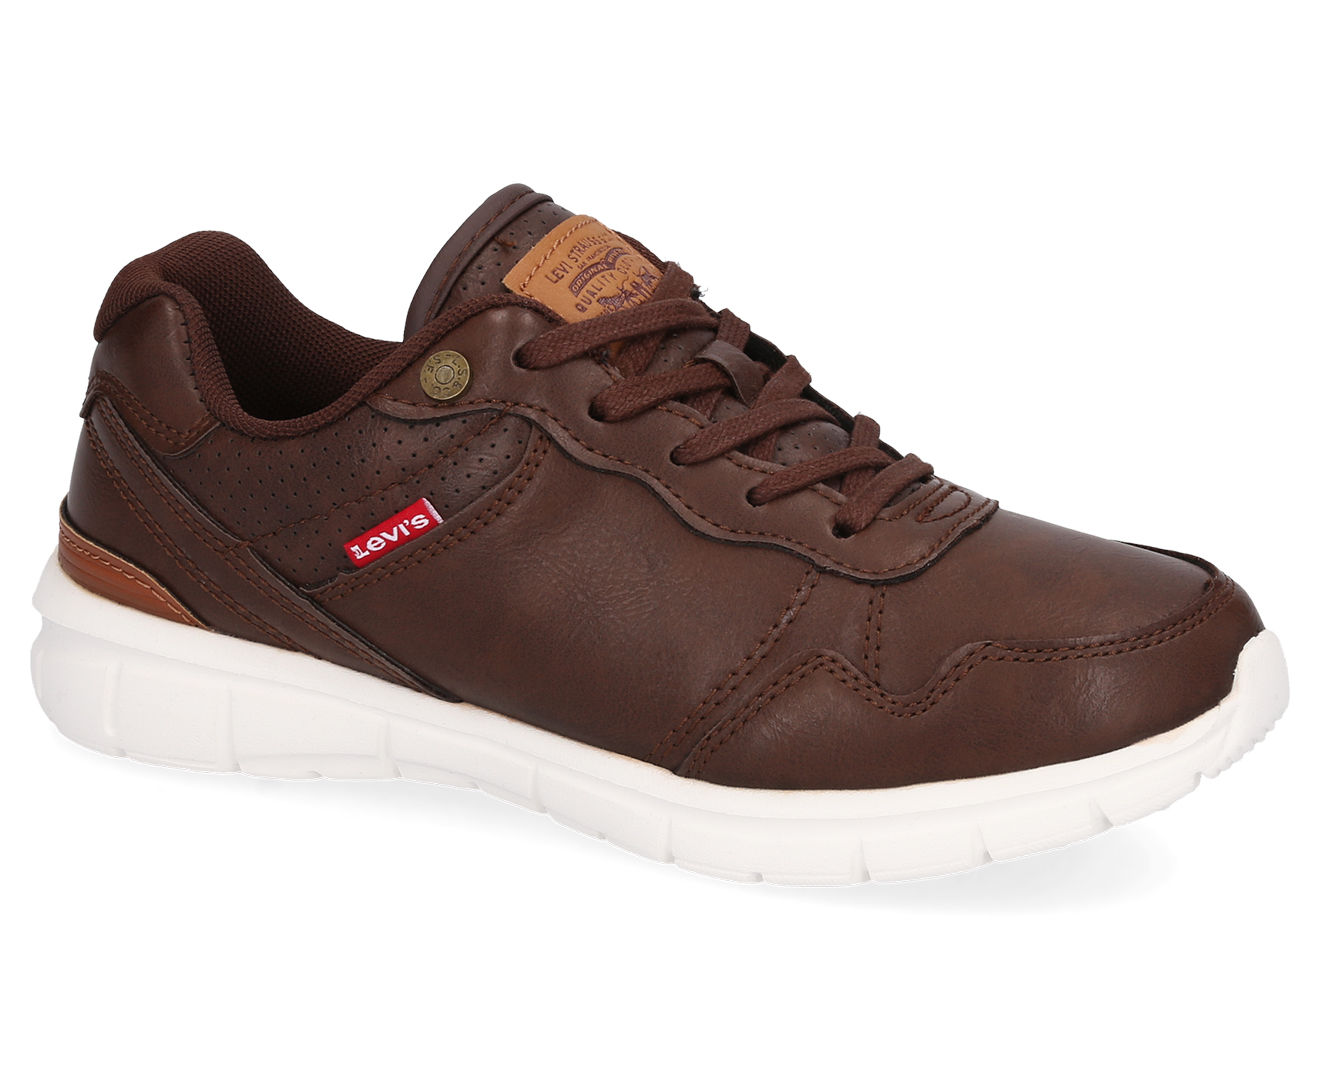 Levi's Boys' Grade-School Colby Burnish Shoes - Brown 